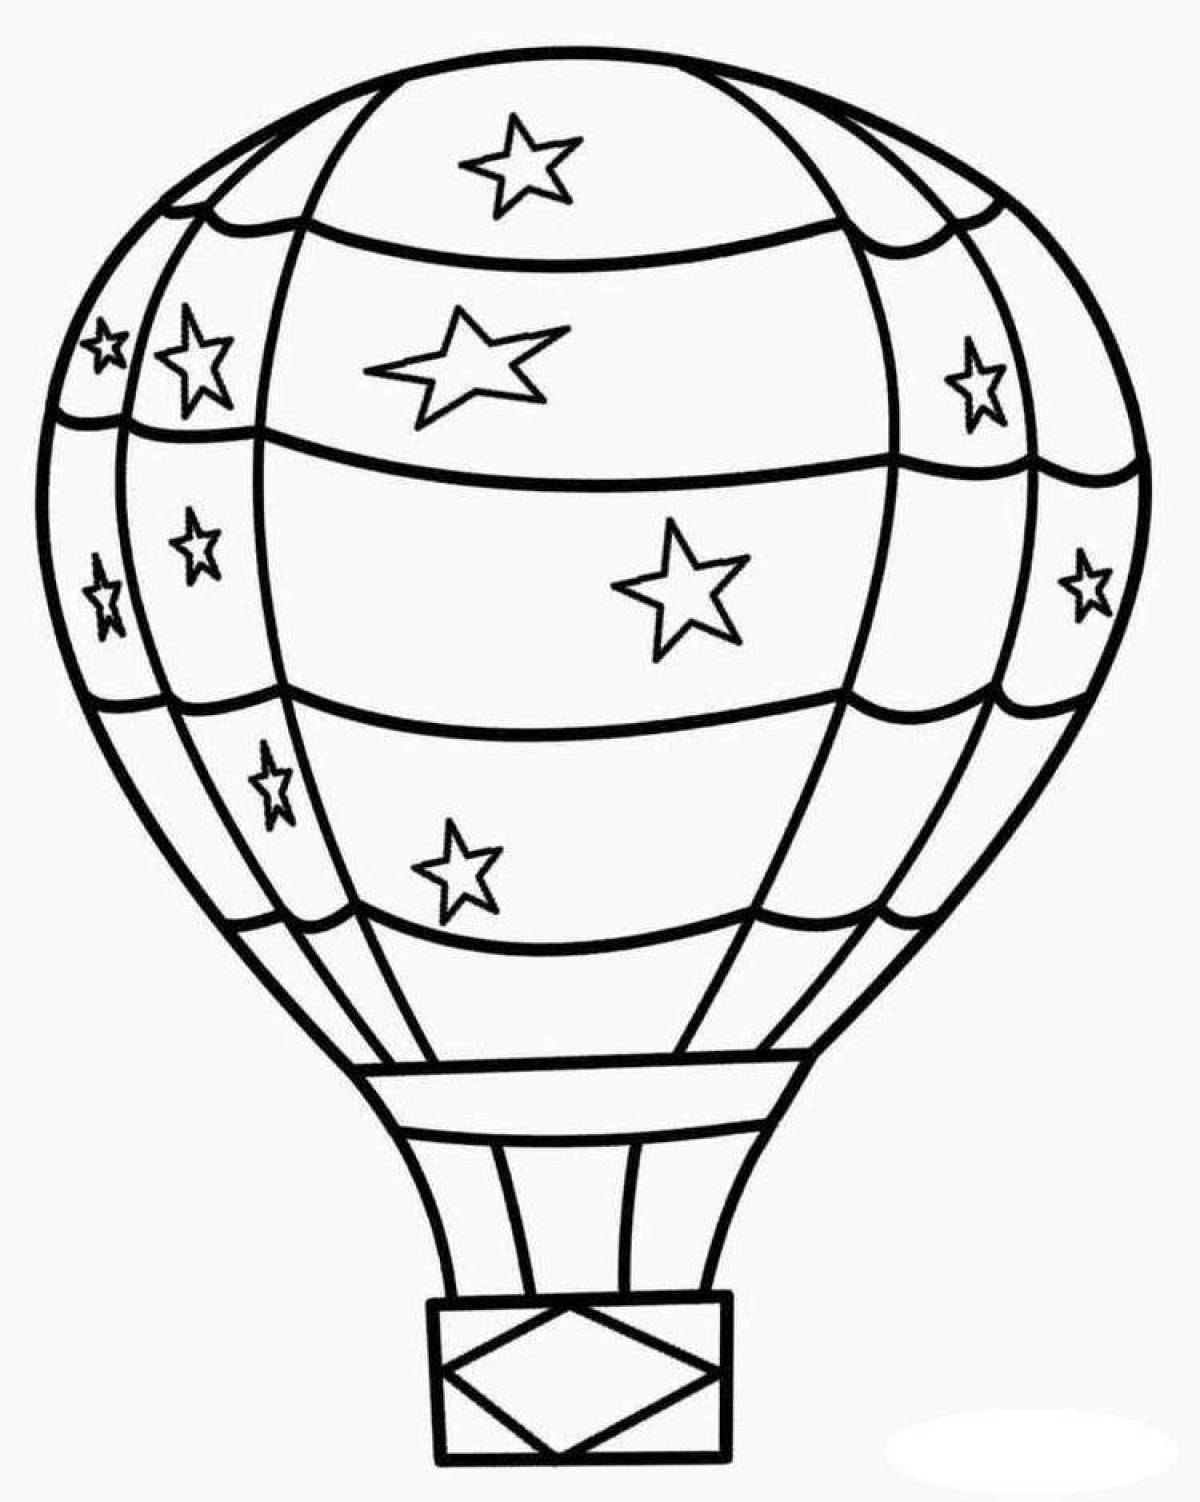 Coloring pages with balloons for kids